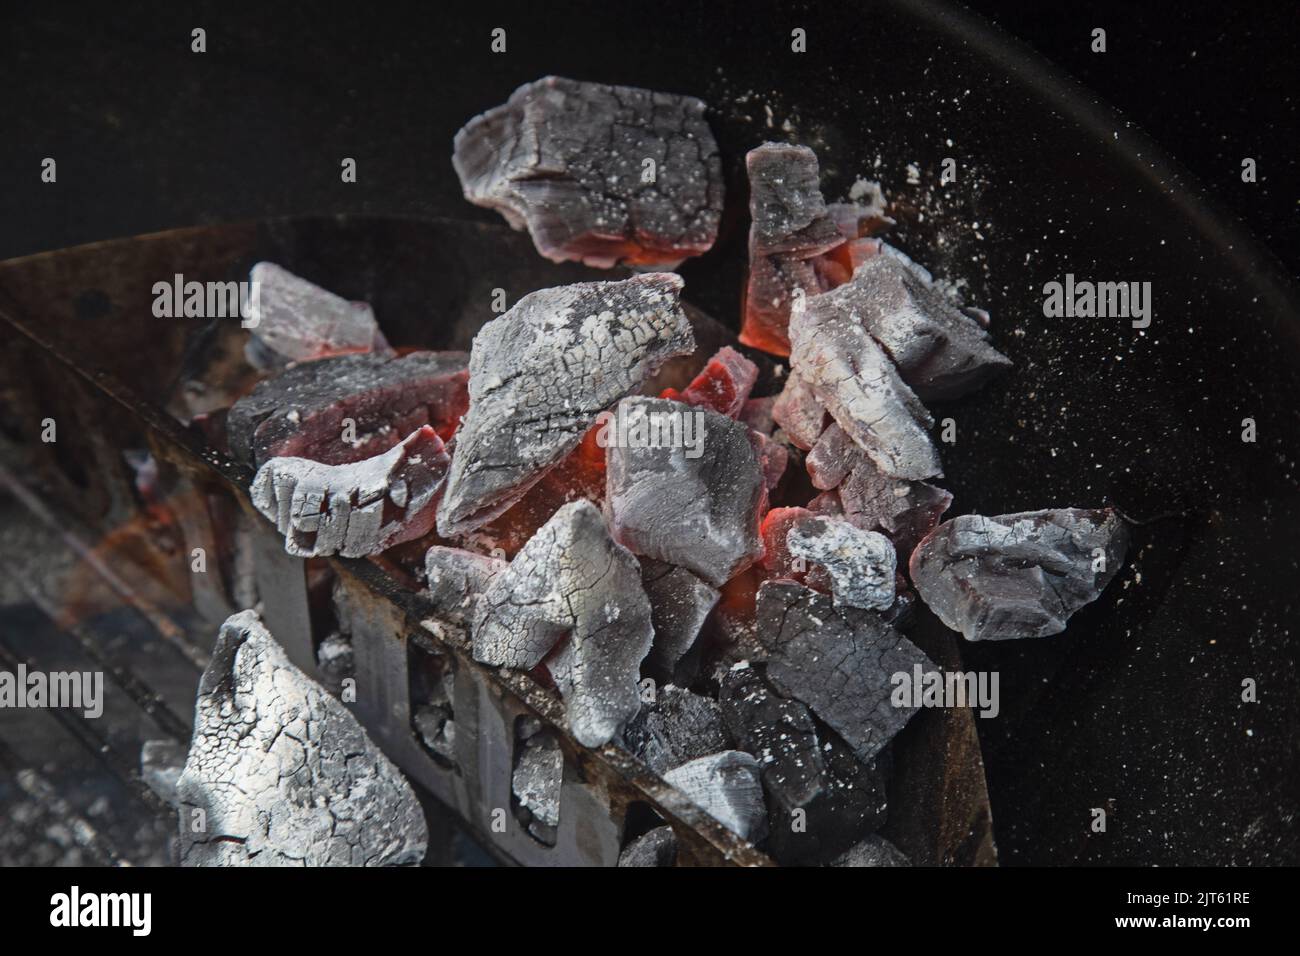 Lumpwood charcoal burning in a kettle barbecue pan, shot close up Stock Photo